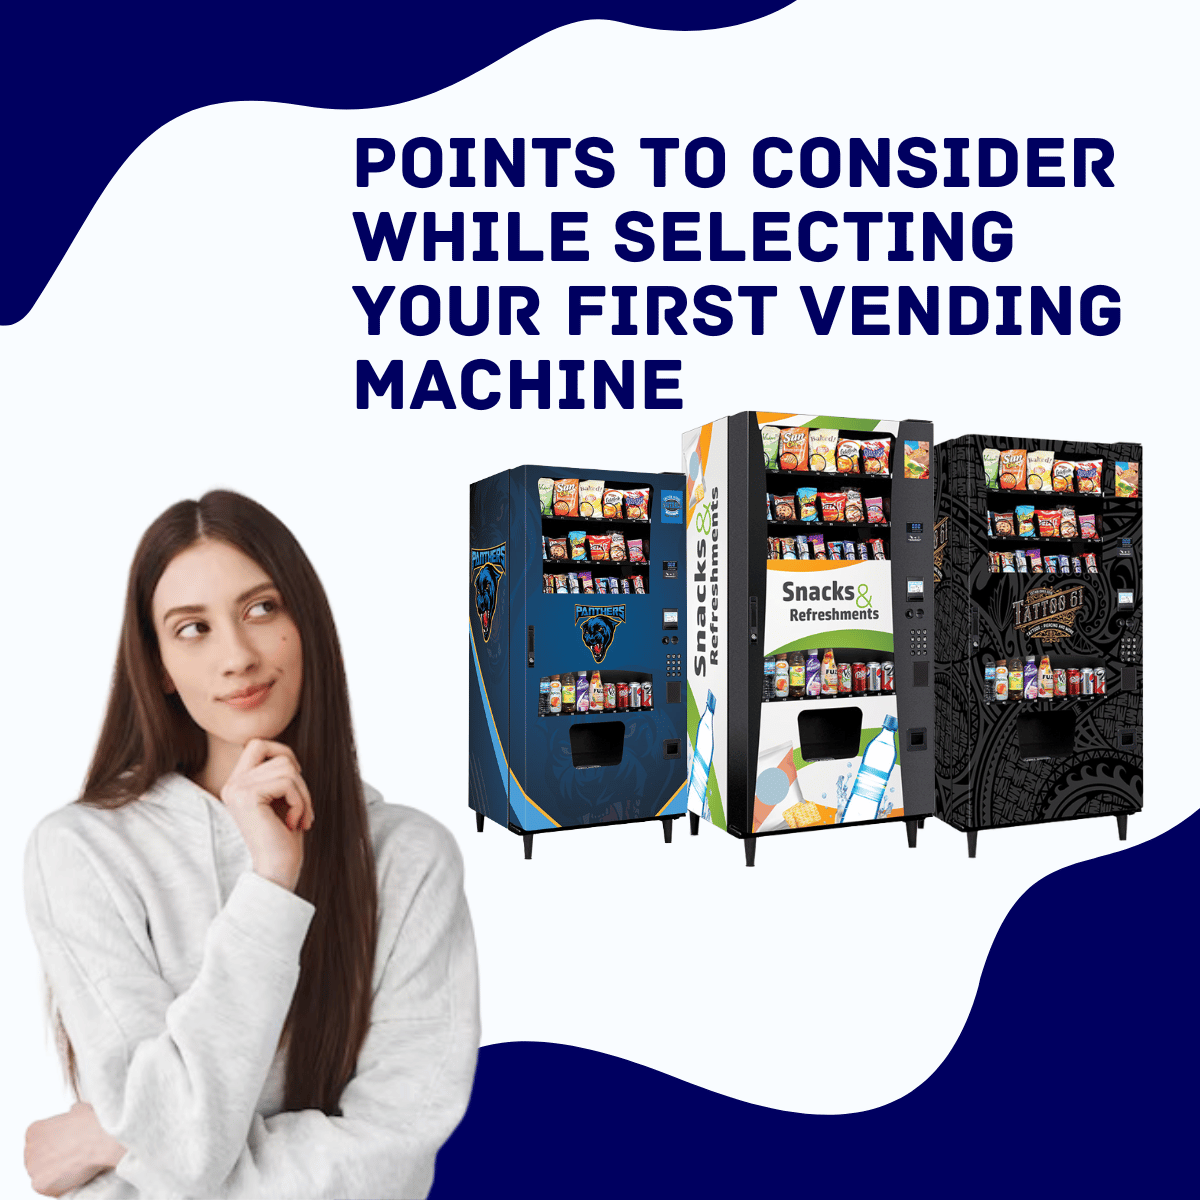 POINTS TO CONSIDER WHILE SELECTING YOUR FIRST VENDING MACHINE